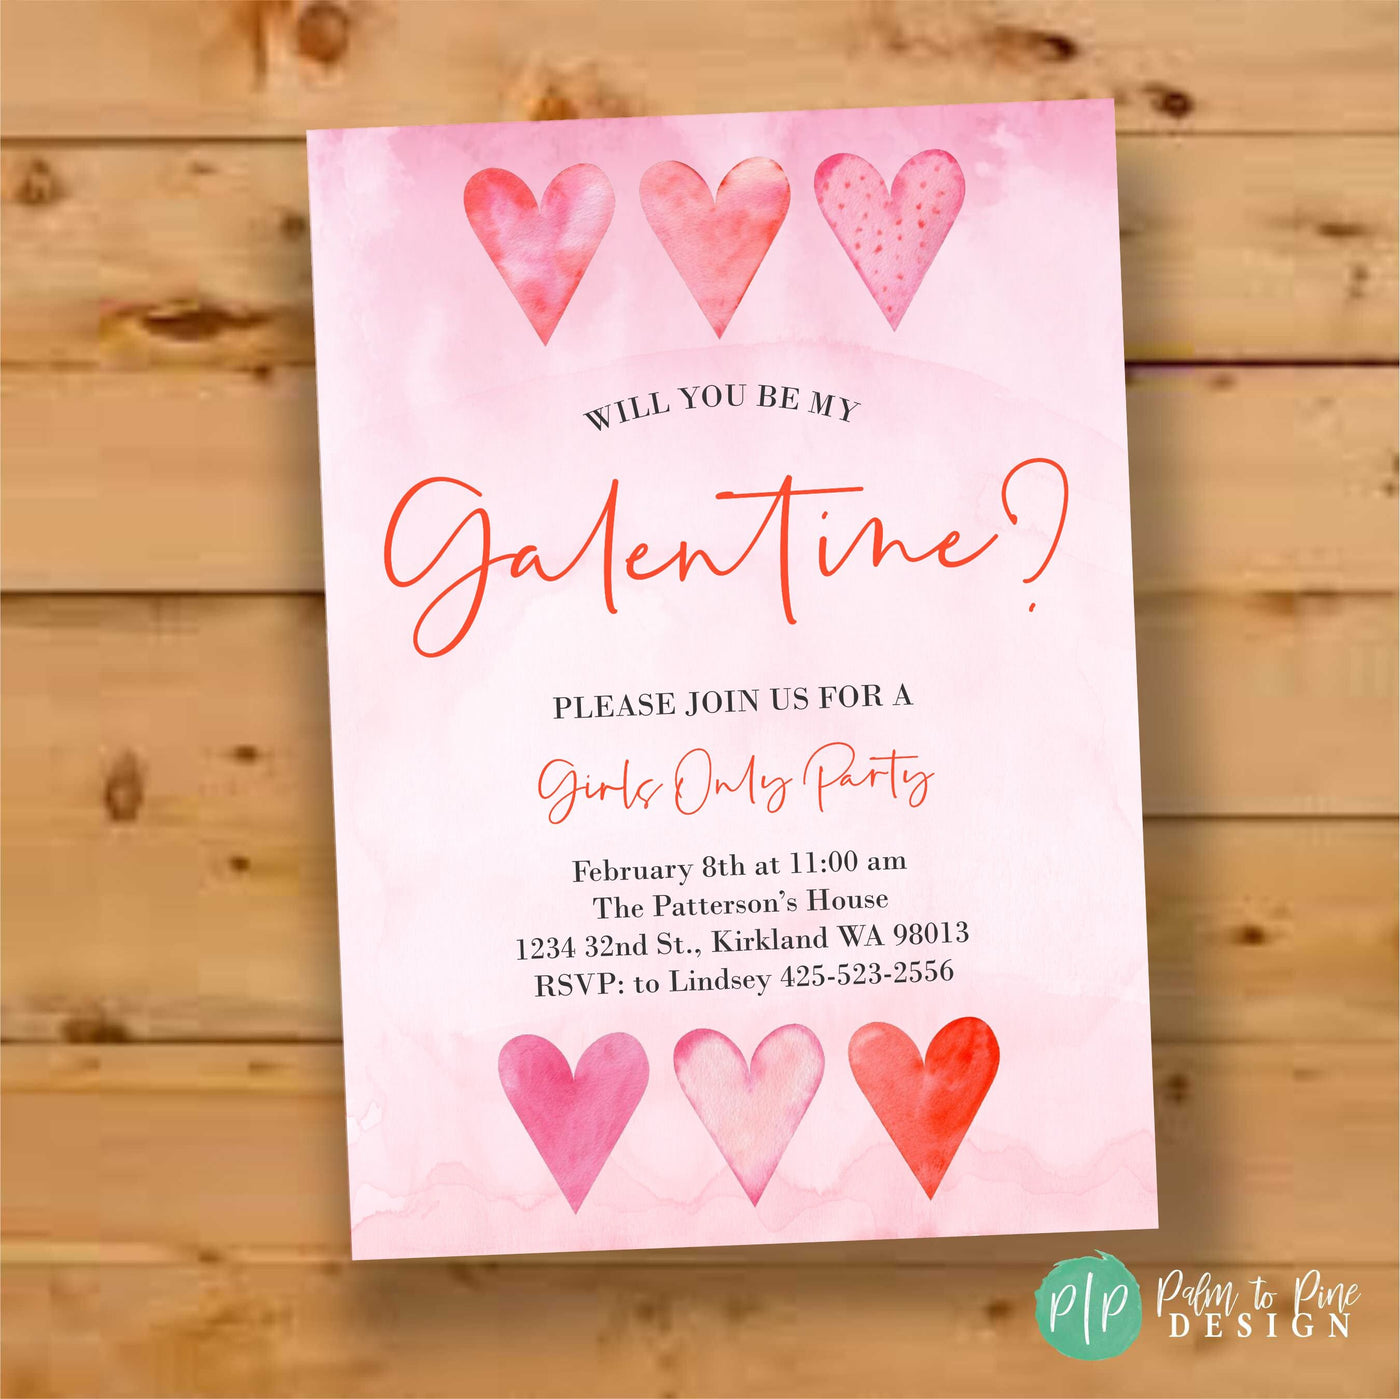 Galentine's Invite, Galentines Invitation, Valentine's Invite, Galentines Day, Watercolor Galentines day party, Pink Watercolor Hearts, pink